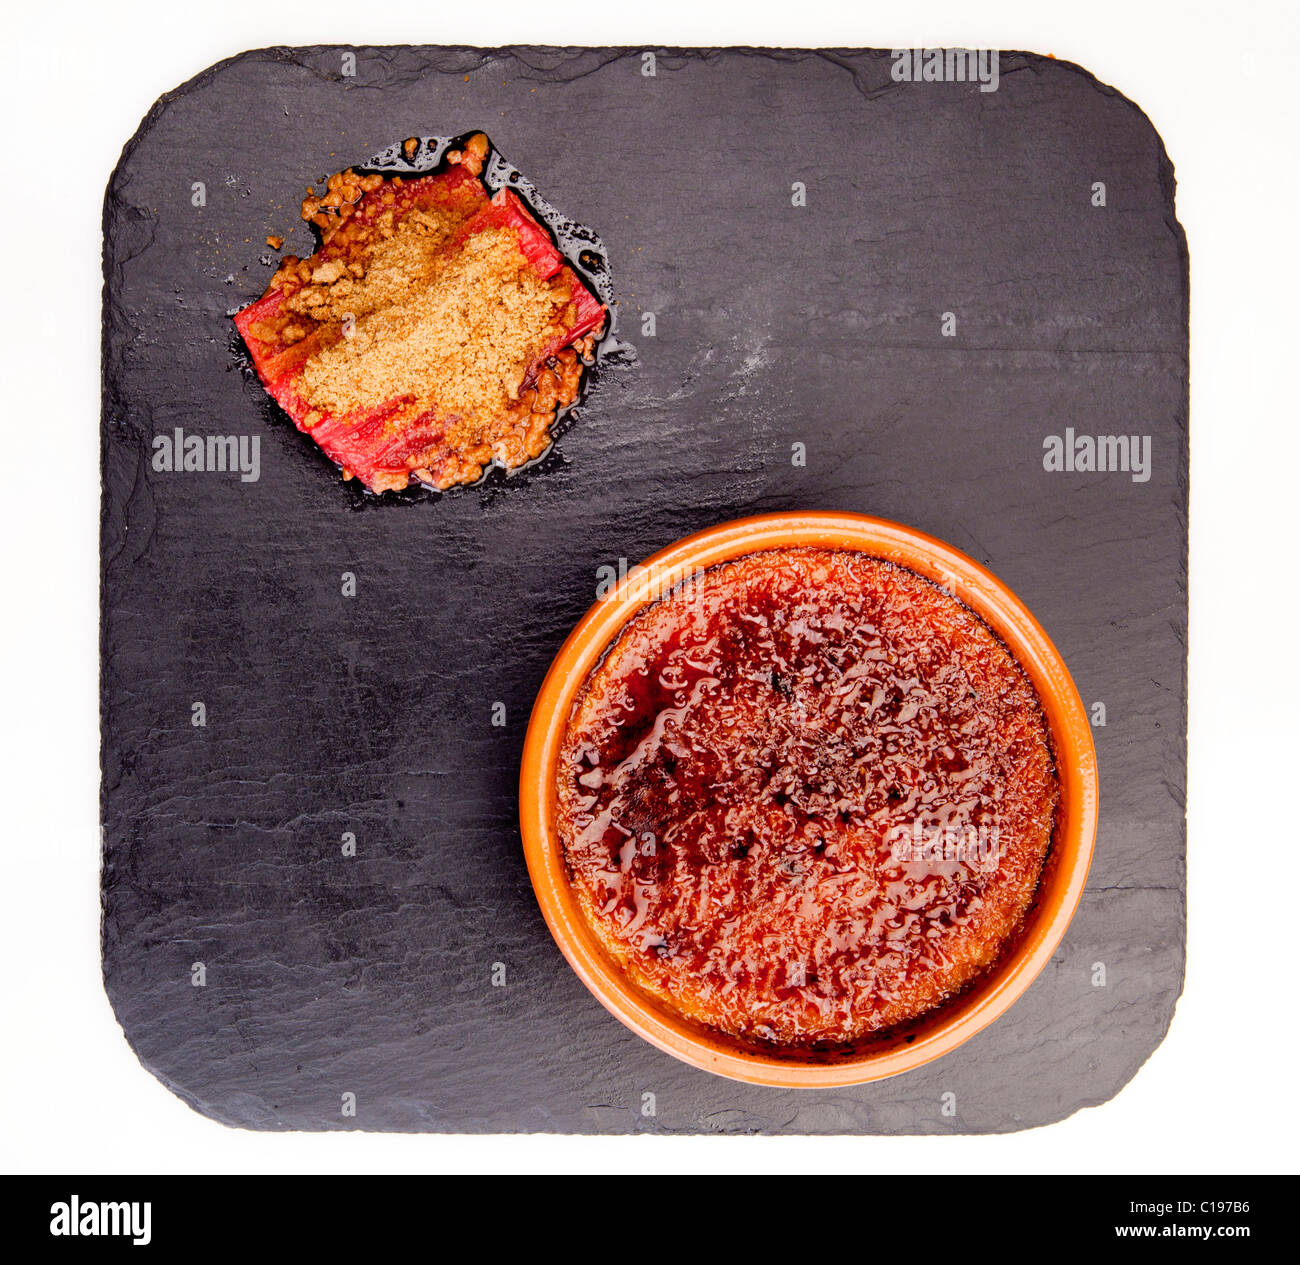 Dessert creme brulee with roasted rhubarb and star anise biscuit on a slate 116479 Food20 Stock Photo